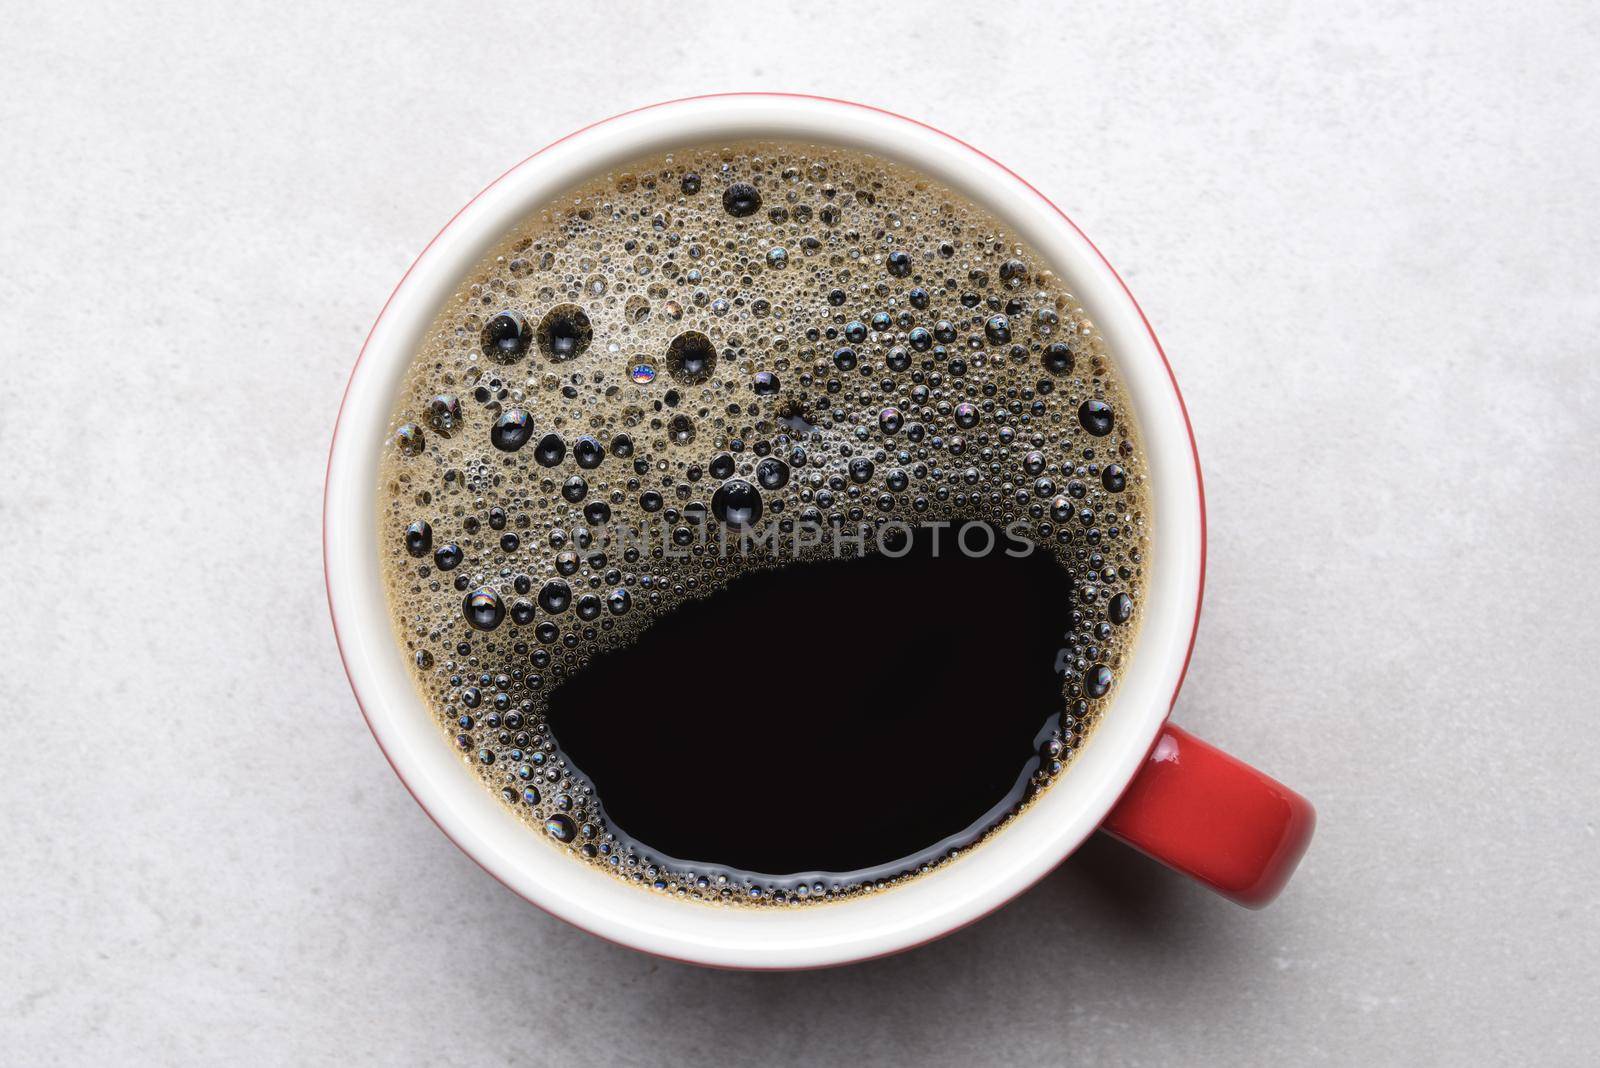 Black coffee in red mug on light gray tile - top view